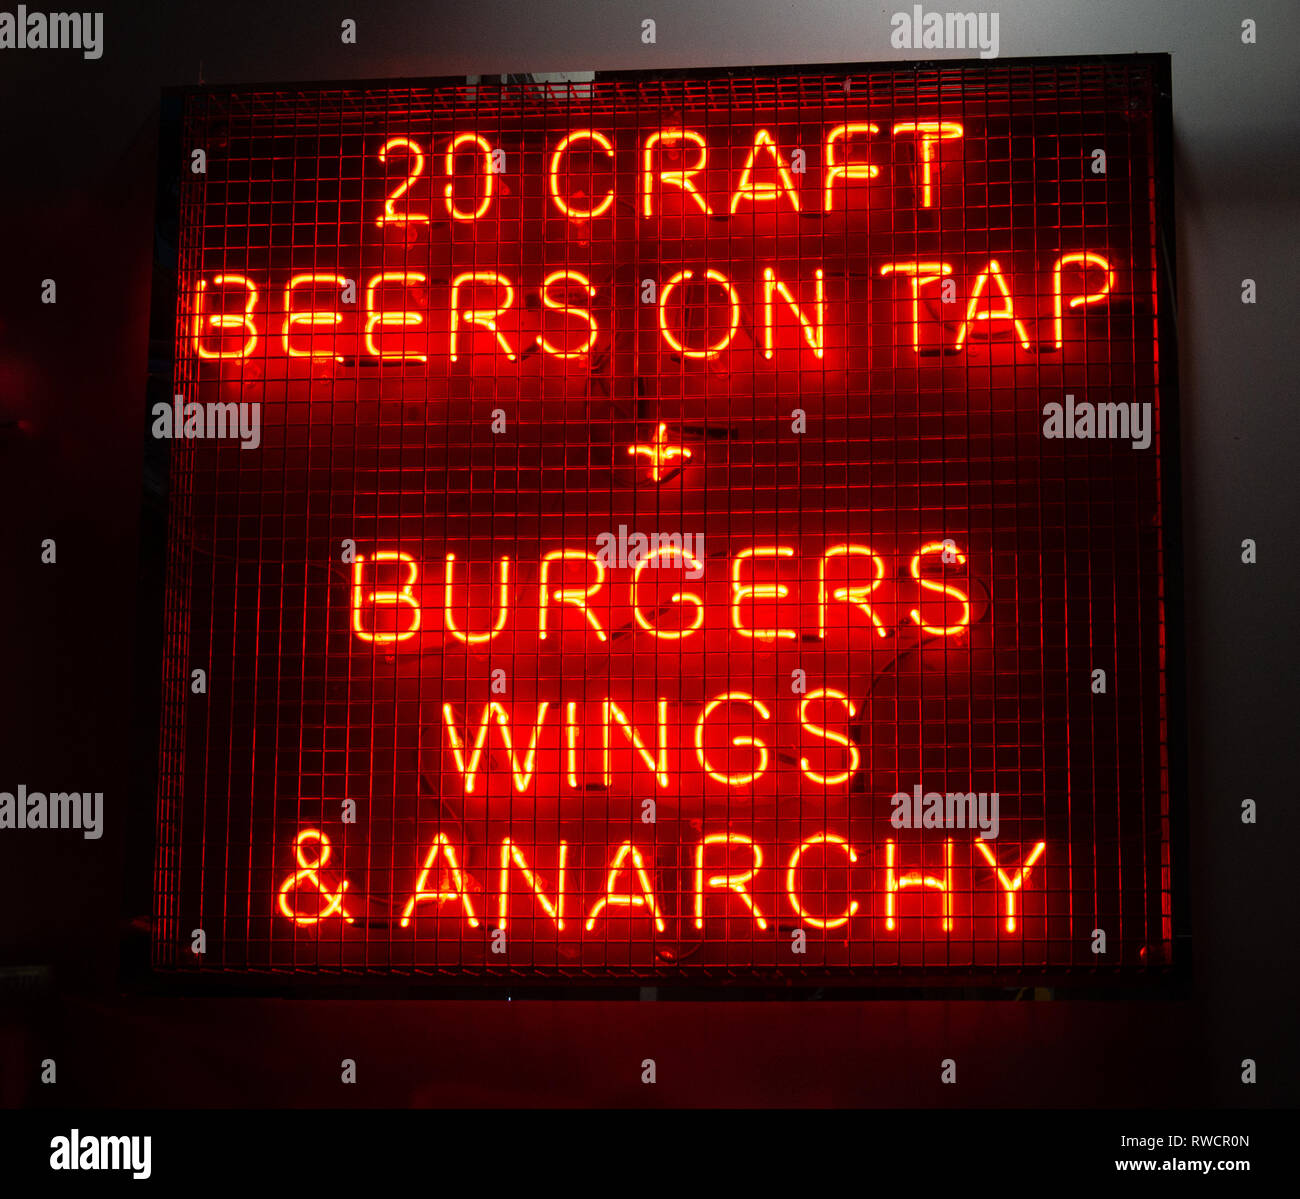 Neon sign, 20 Craft Beers on Tap + Burgers Wings & Anarchy, London, UK Stock Photo